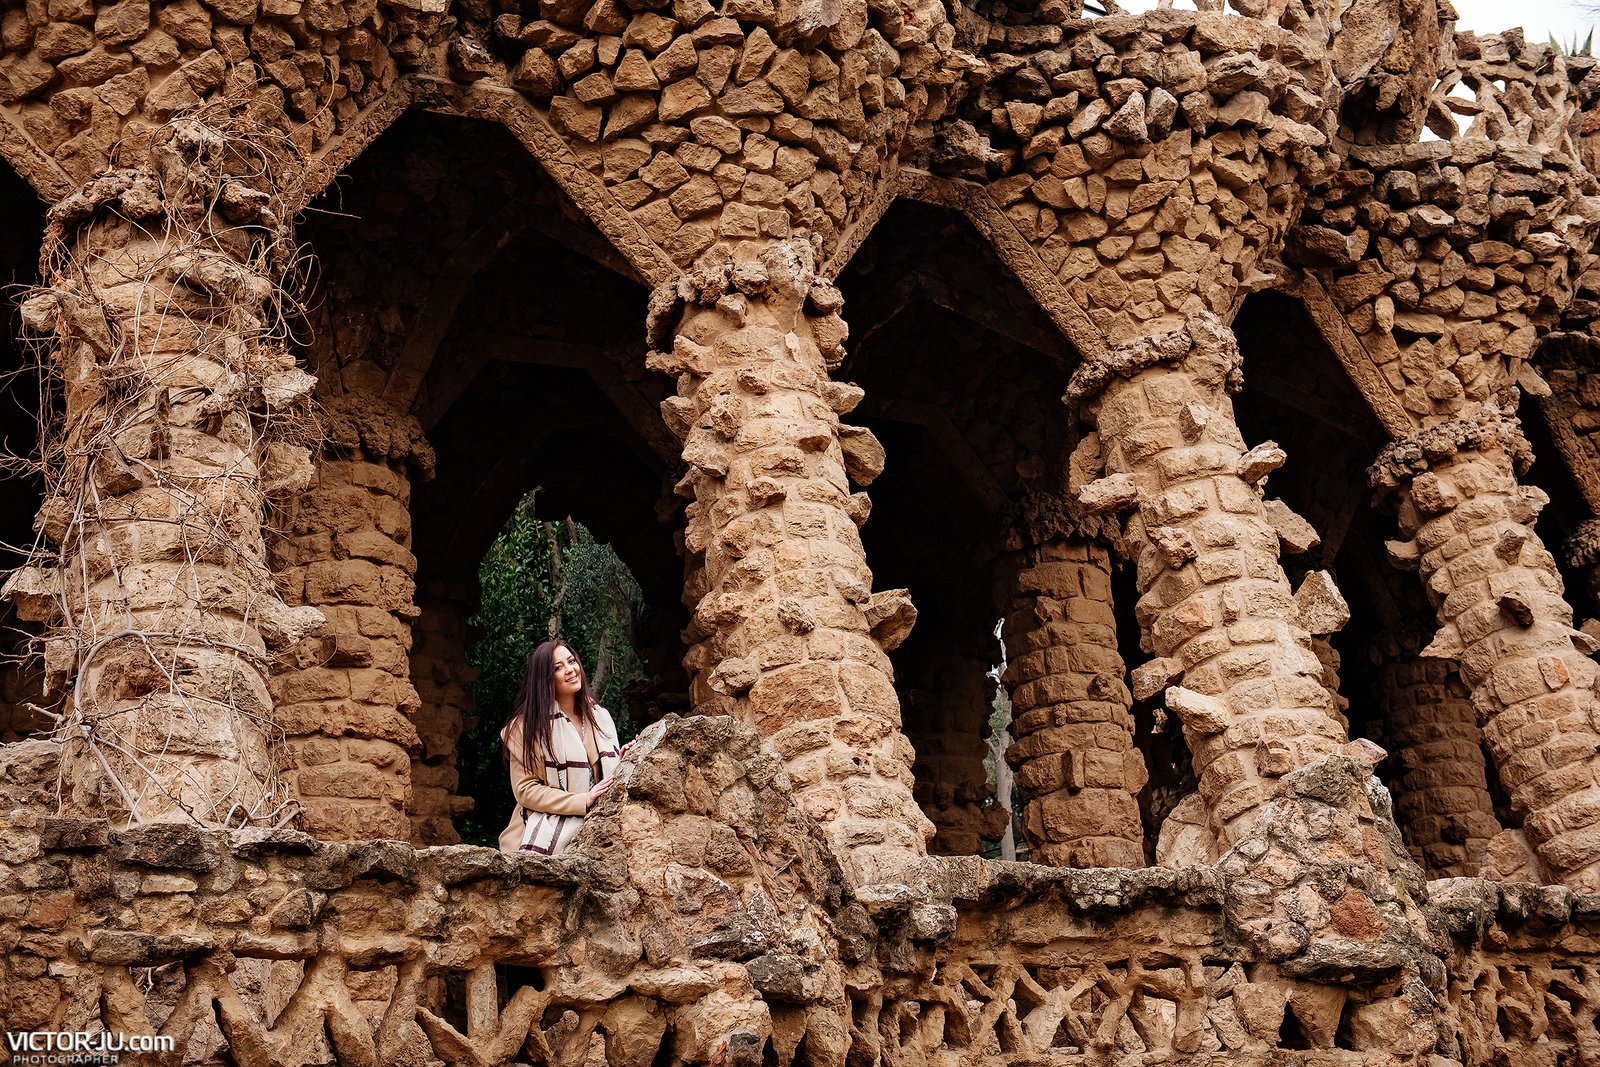 Photoshoot in Barcelona, Park Guell